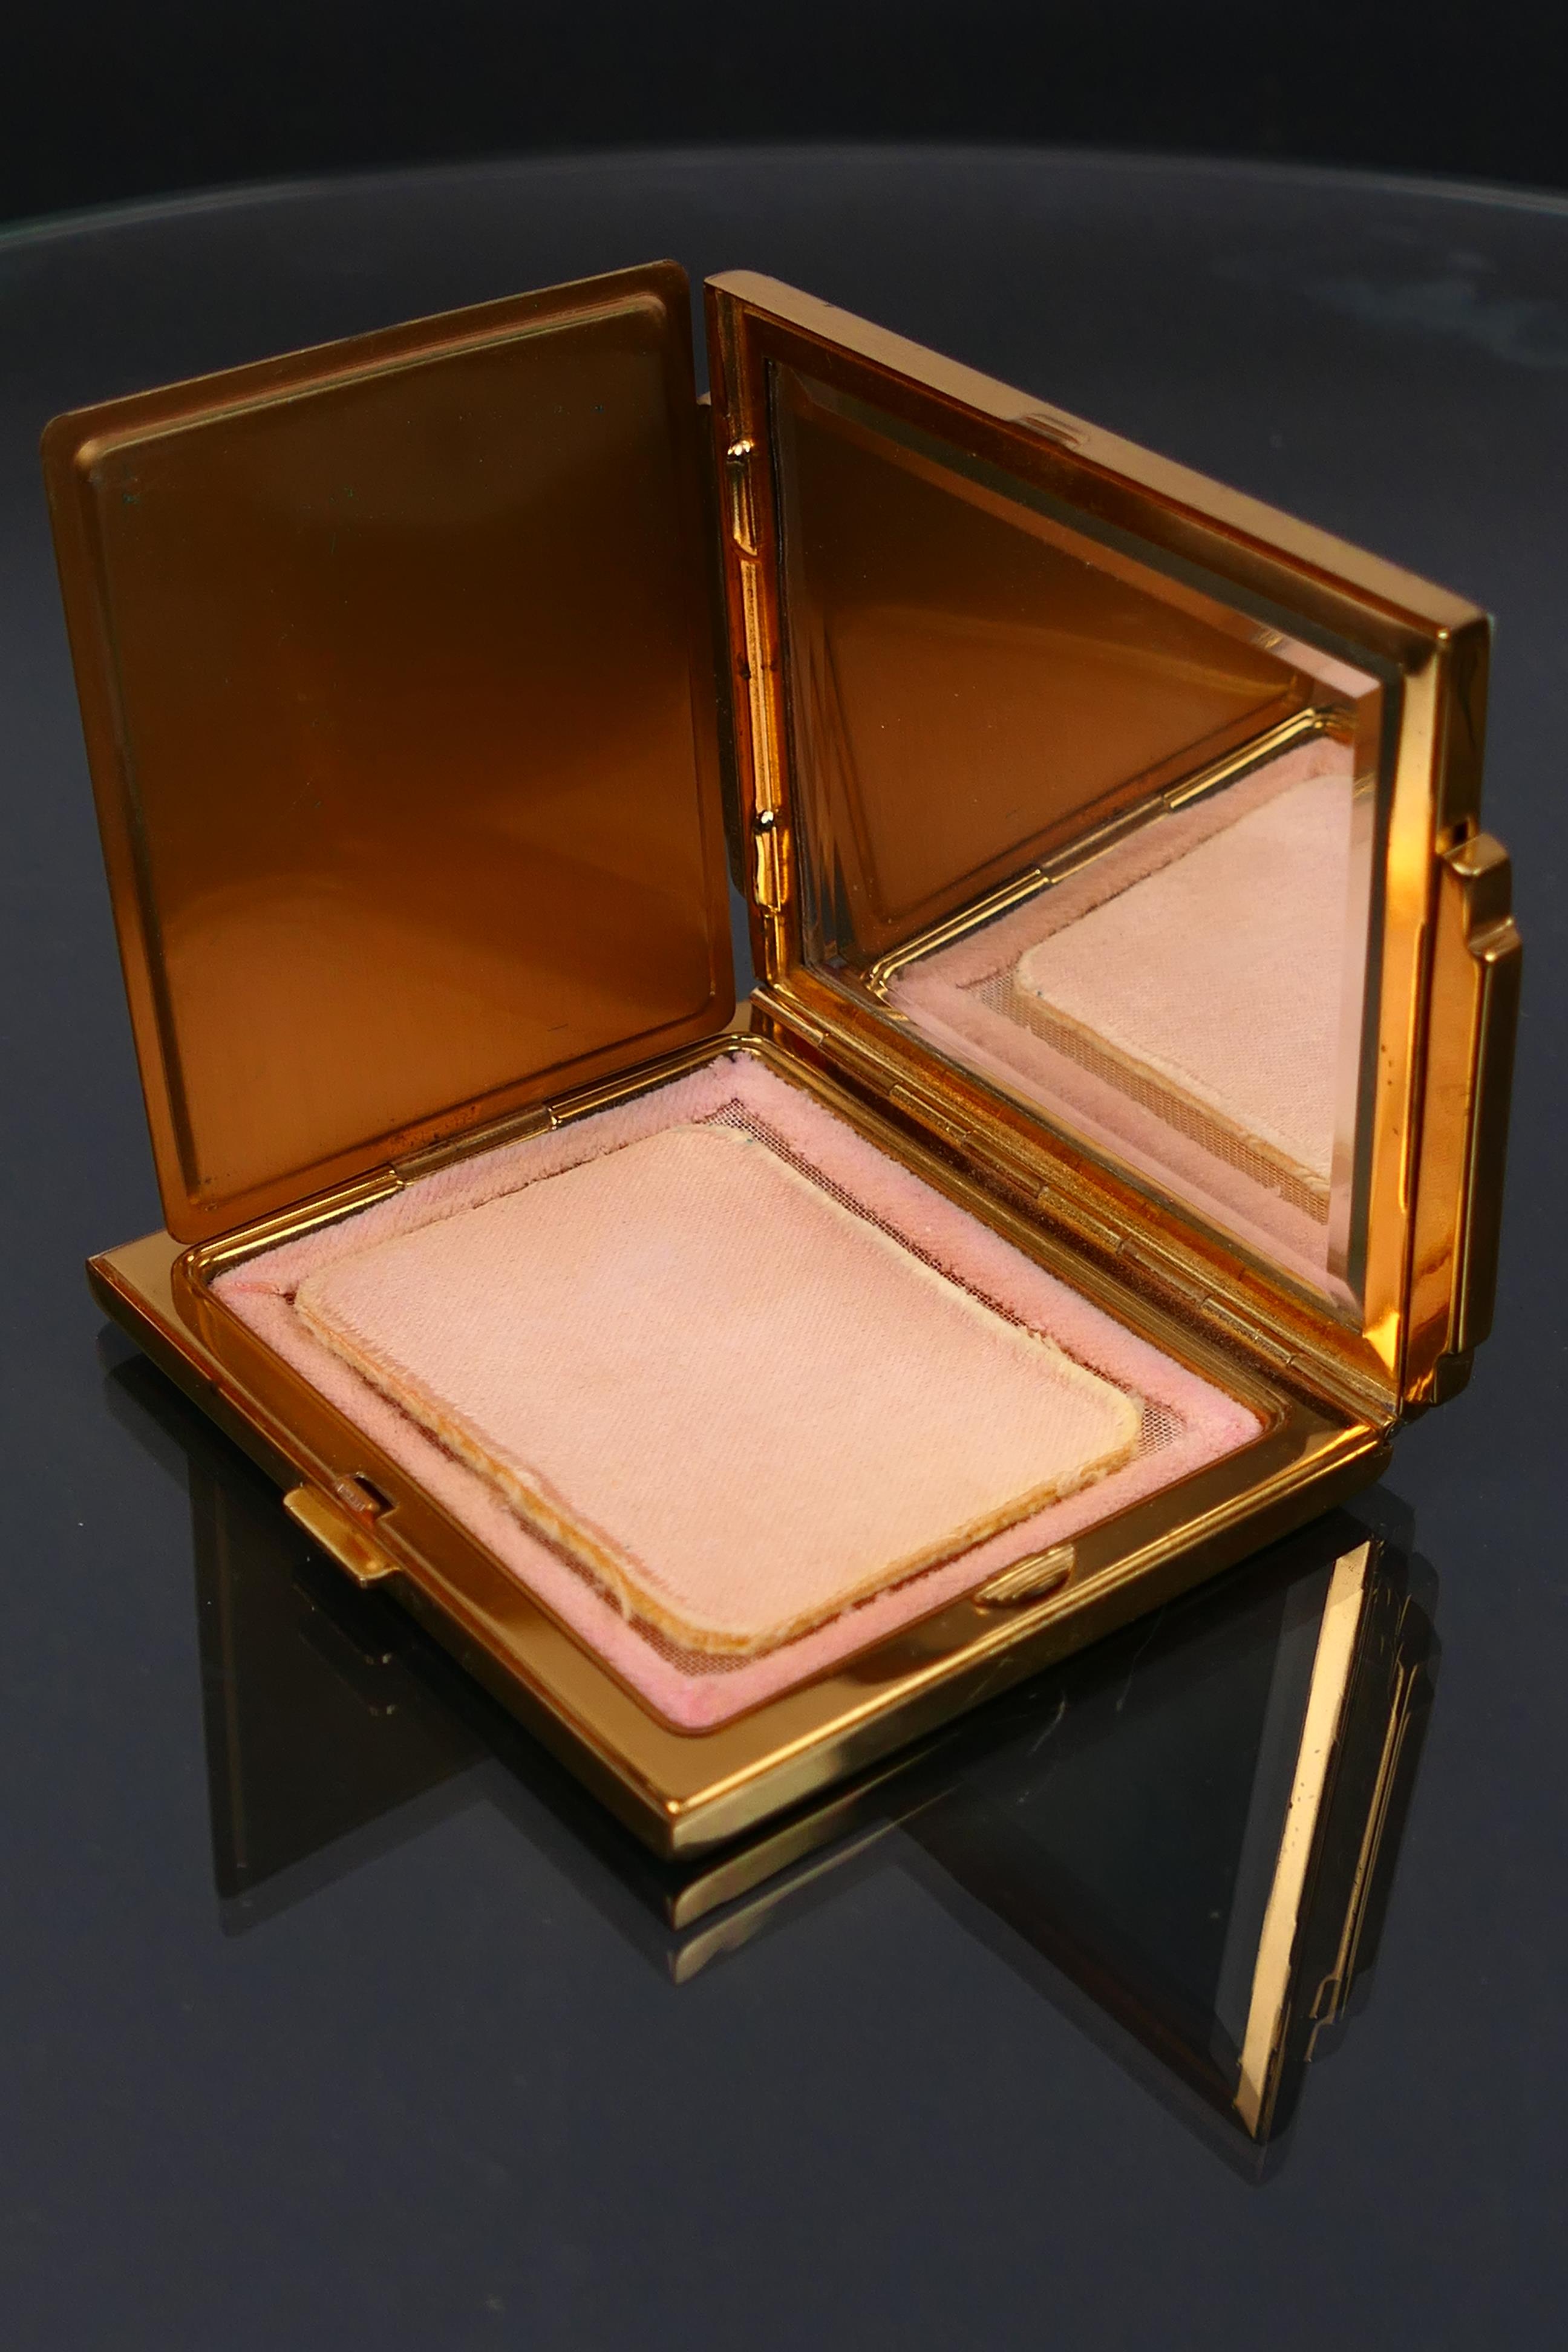 AGME - A mother of pearl faced art deco style powder compact. - Image 6 of 9